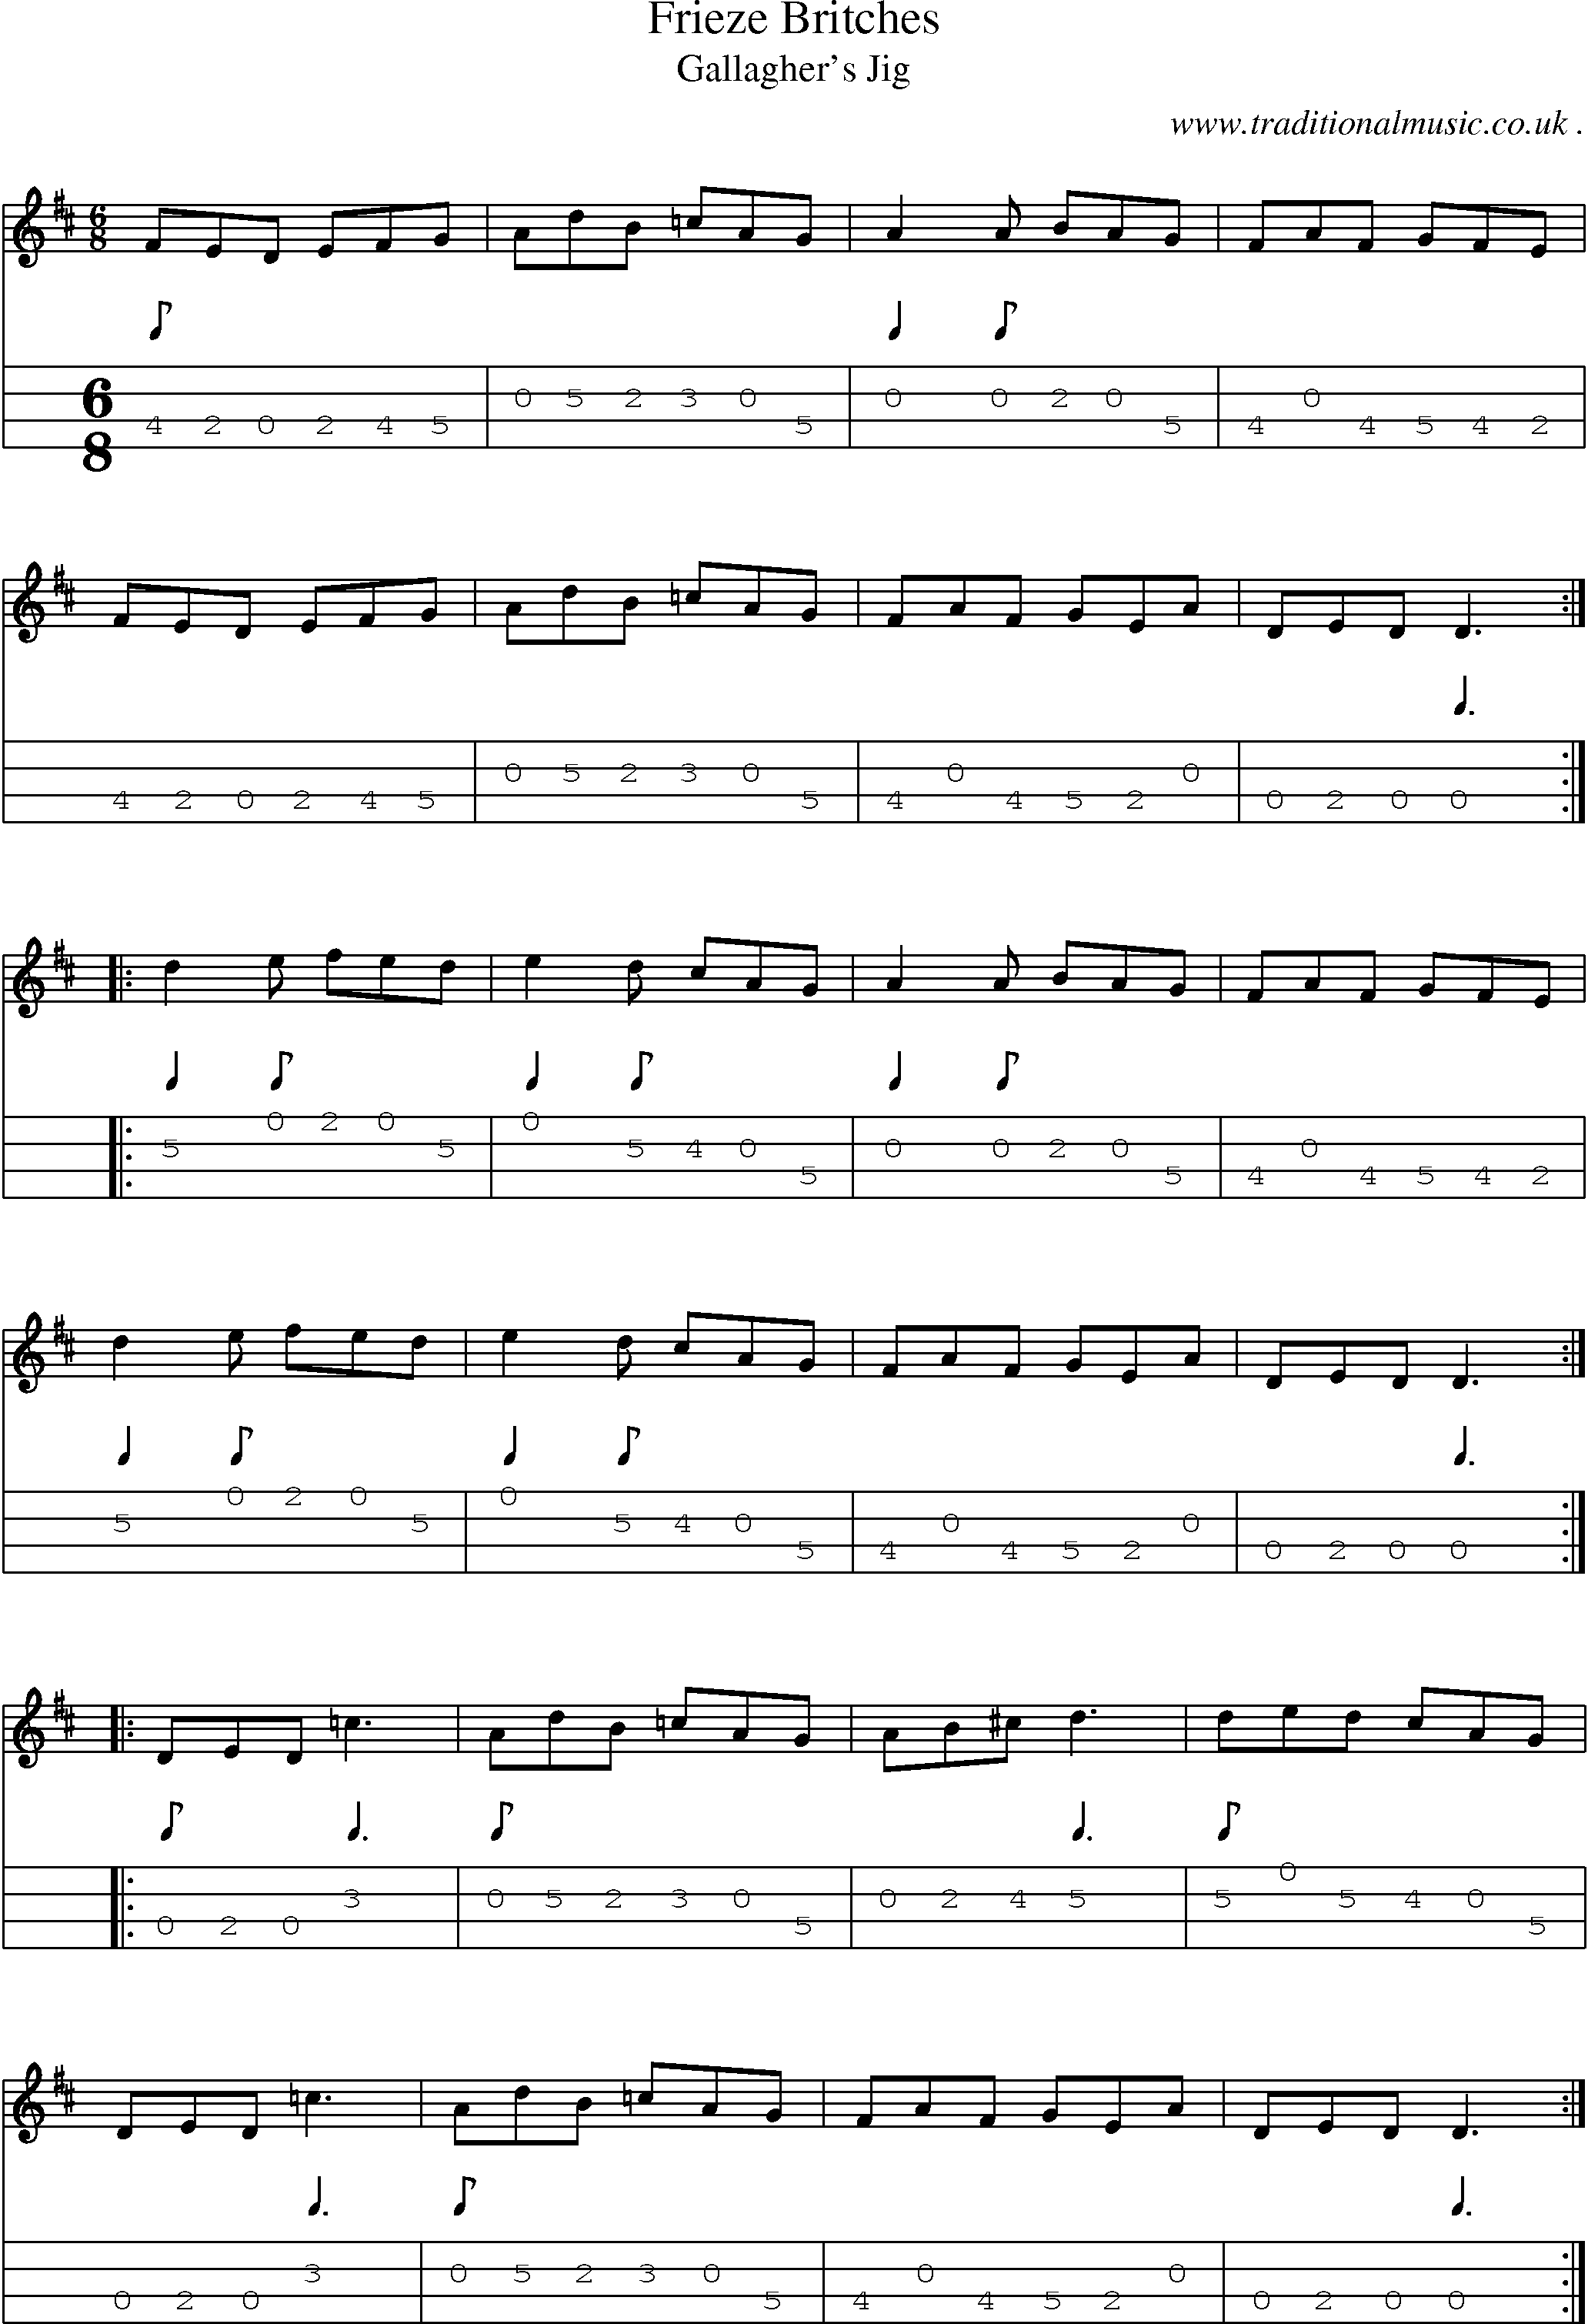 Sheet-Music and Mandolin Tabs for Frieze Britches